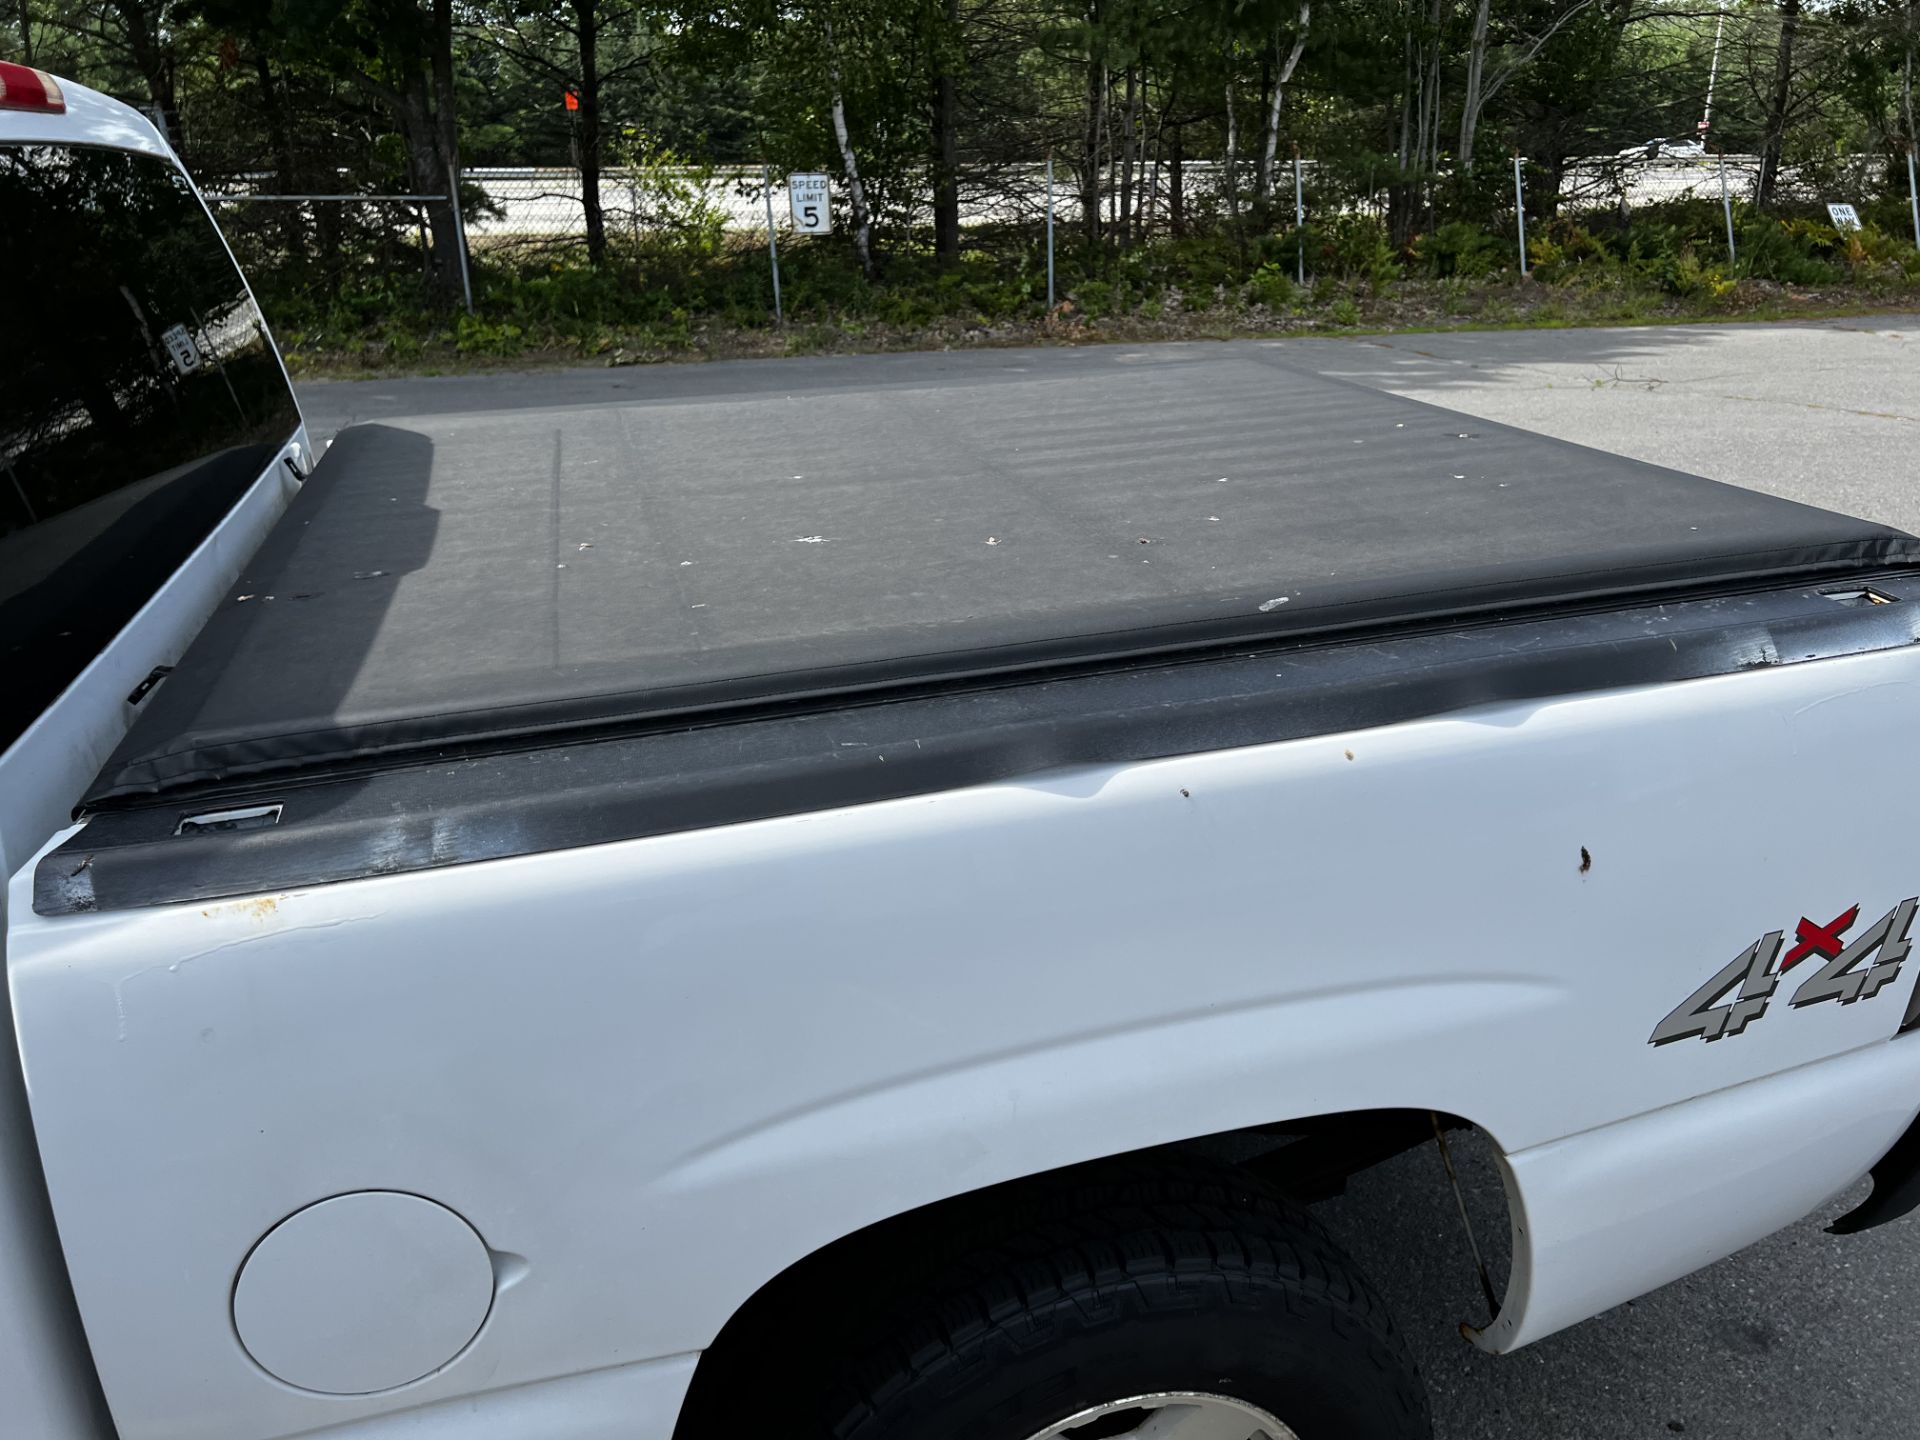 2006 Chev 1500, 4 Door, 4x4 Pickup w/Plow, Auto, A/C, Bed Tonneau Cover, ODOM: 112,487, VIN: - Image 2 of 6